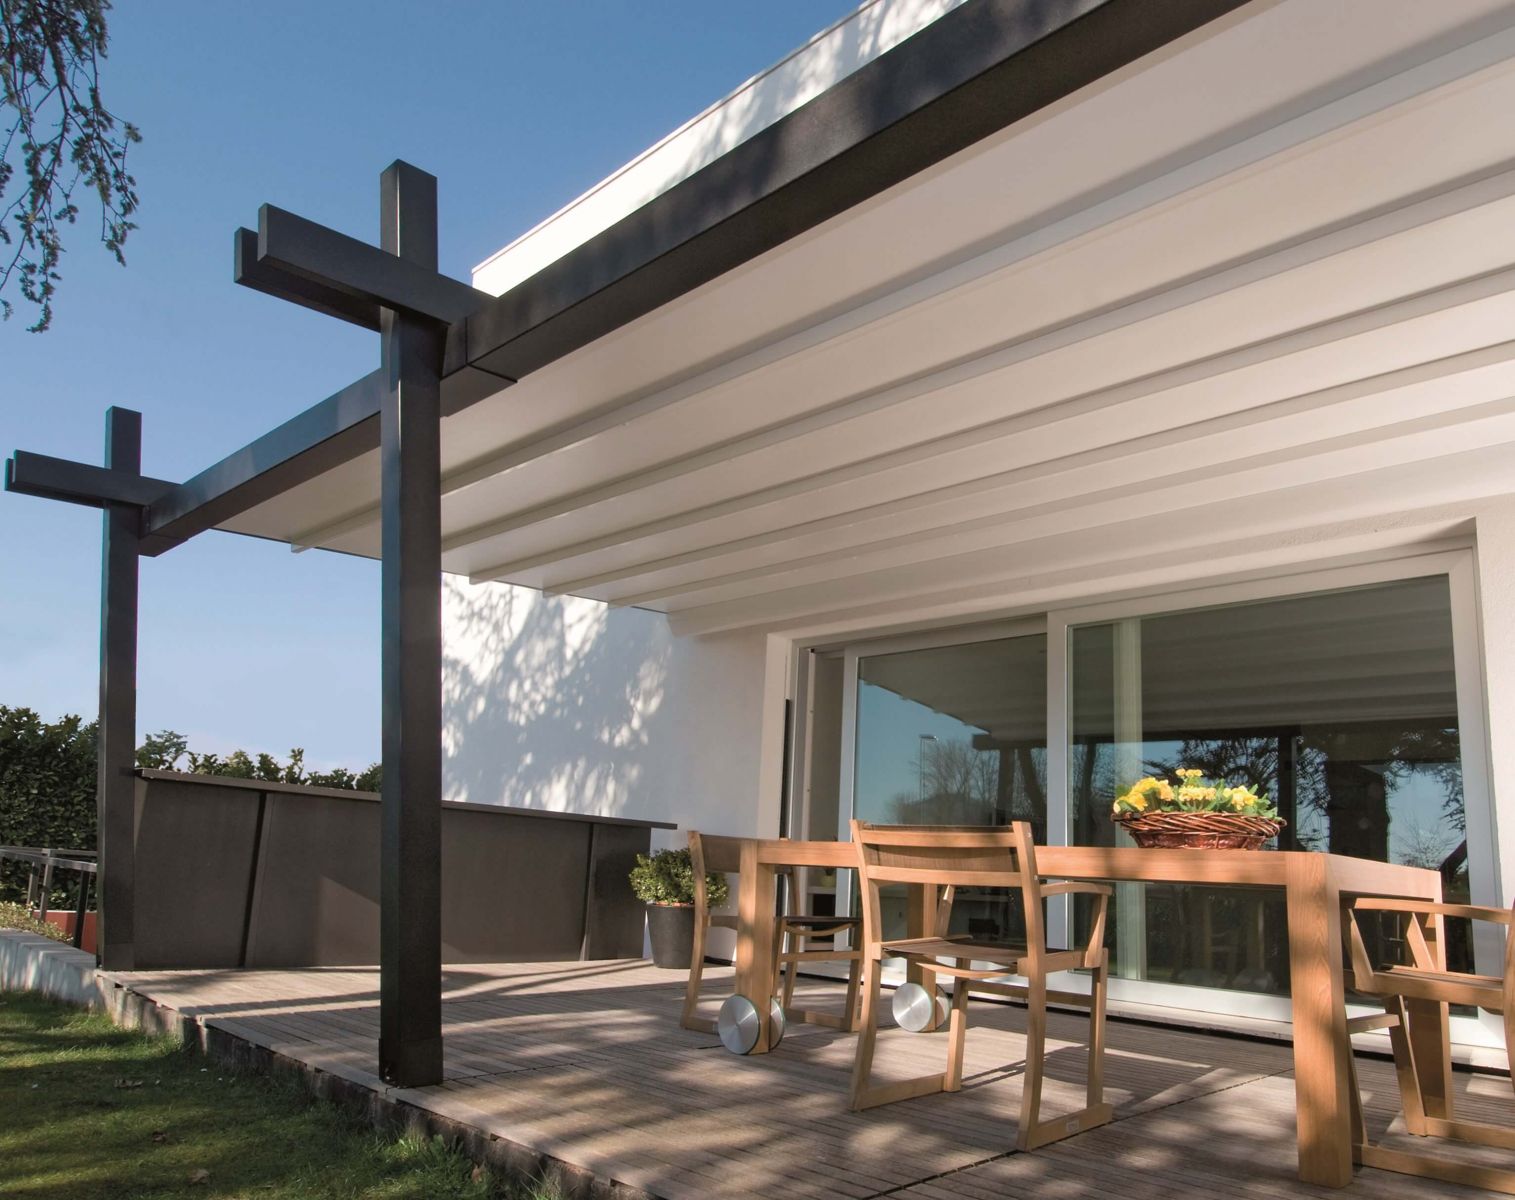 black wooden pergola with cream shade extended out over small patio area